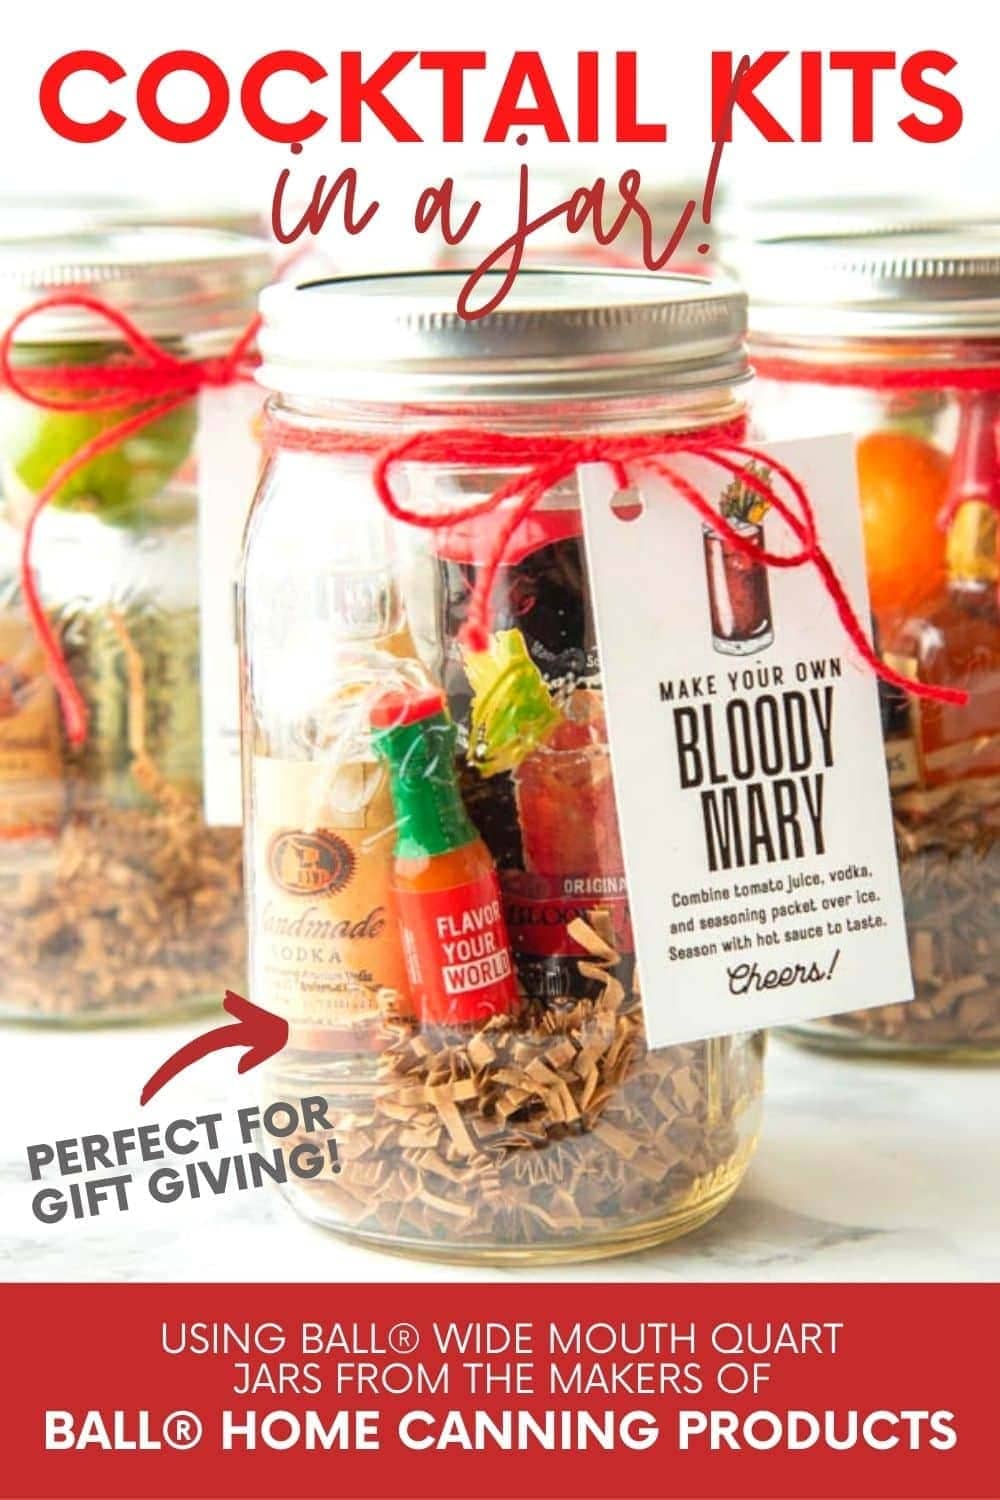 Close view of a diy bloody mary cocktail kit. A text overlay reads, "Cocktail Kits in a Jar! Perfect for Gift Giving! Using Ball Wide Mouth Quart Jars from the Makers of Ball Home Canning Products."